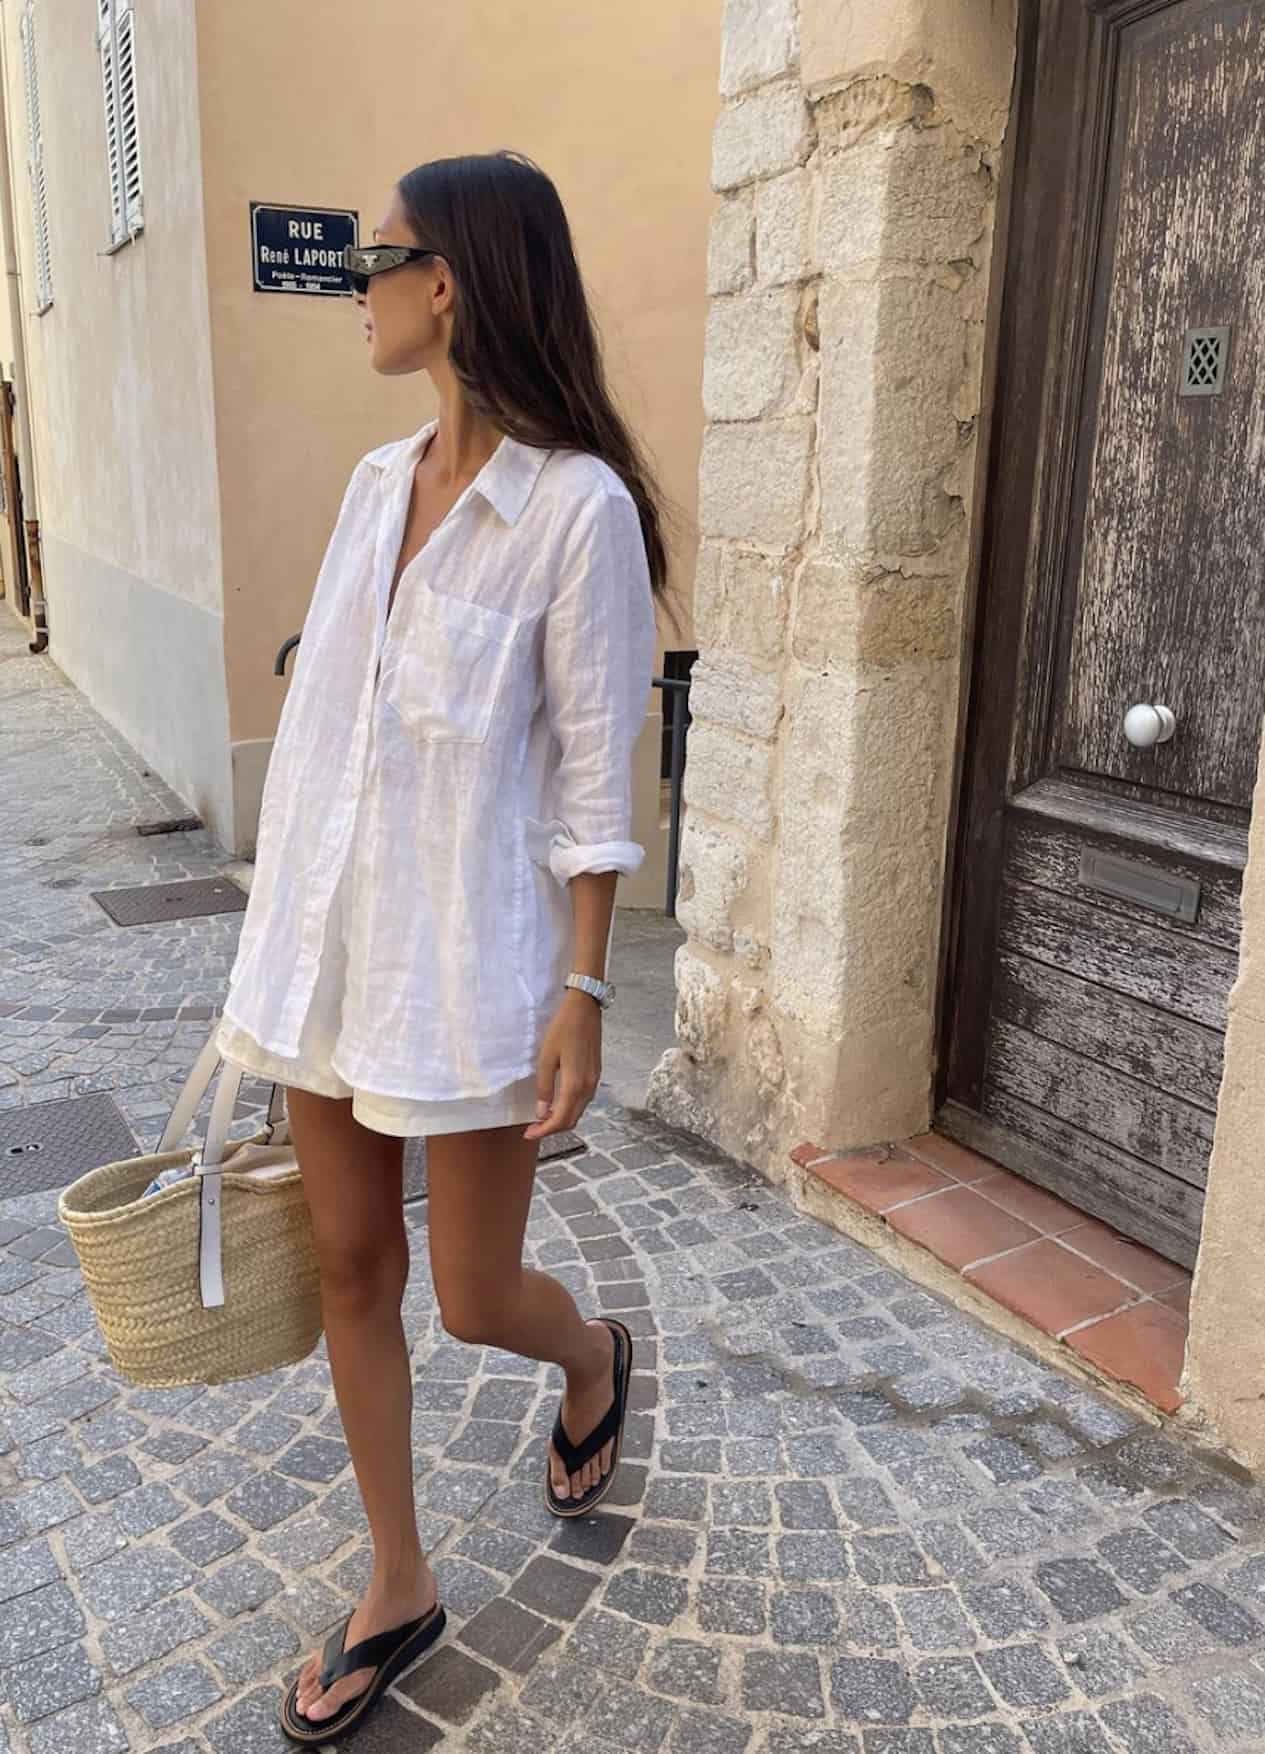 image of a woman walking down a road wearing a white linen button up shirt, shorts, and sandals